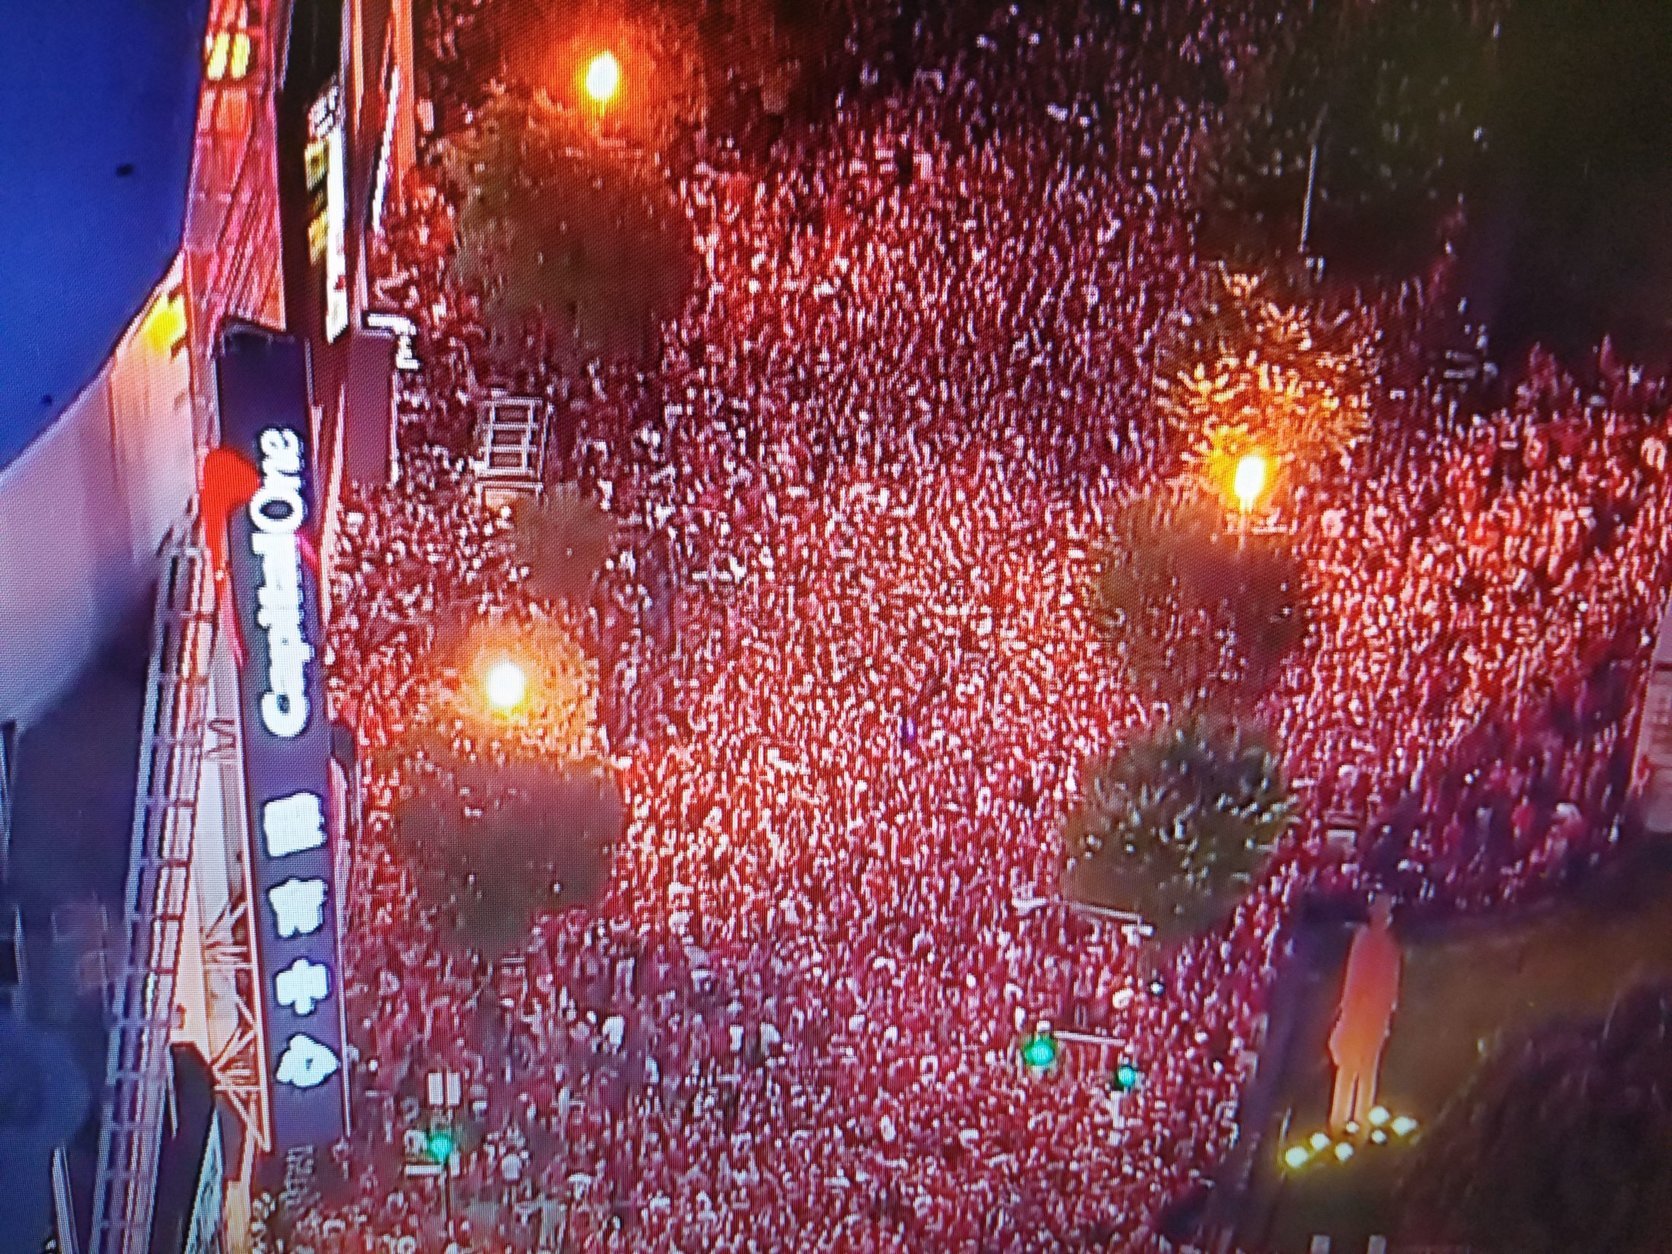 An immense crowd gathers outside  Capital One Arena during Thursday's game on June 7. (NBC Washington)